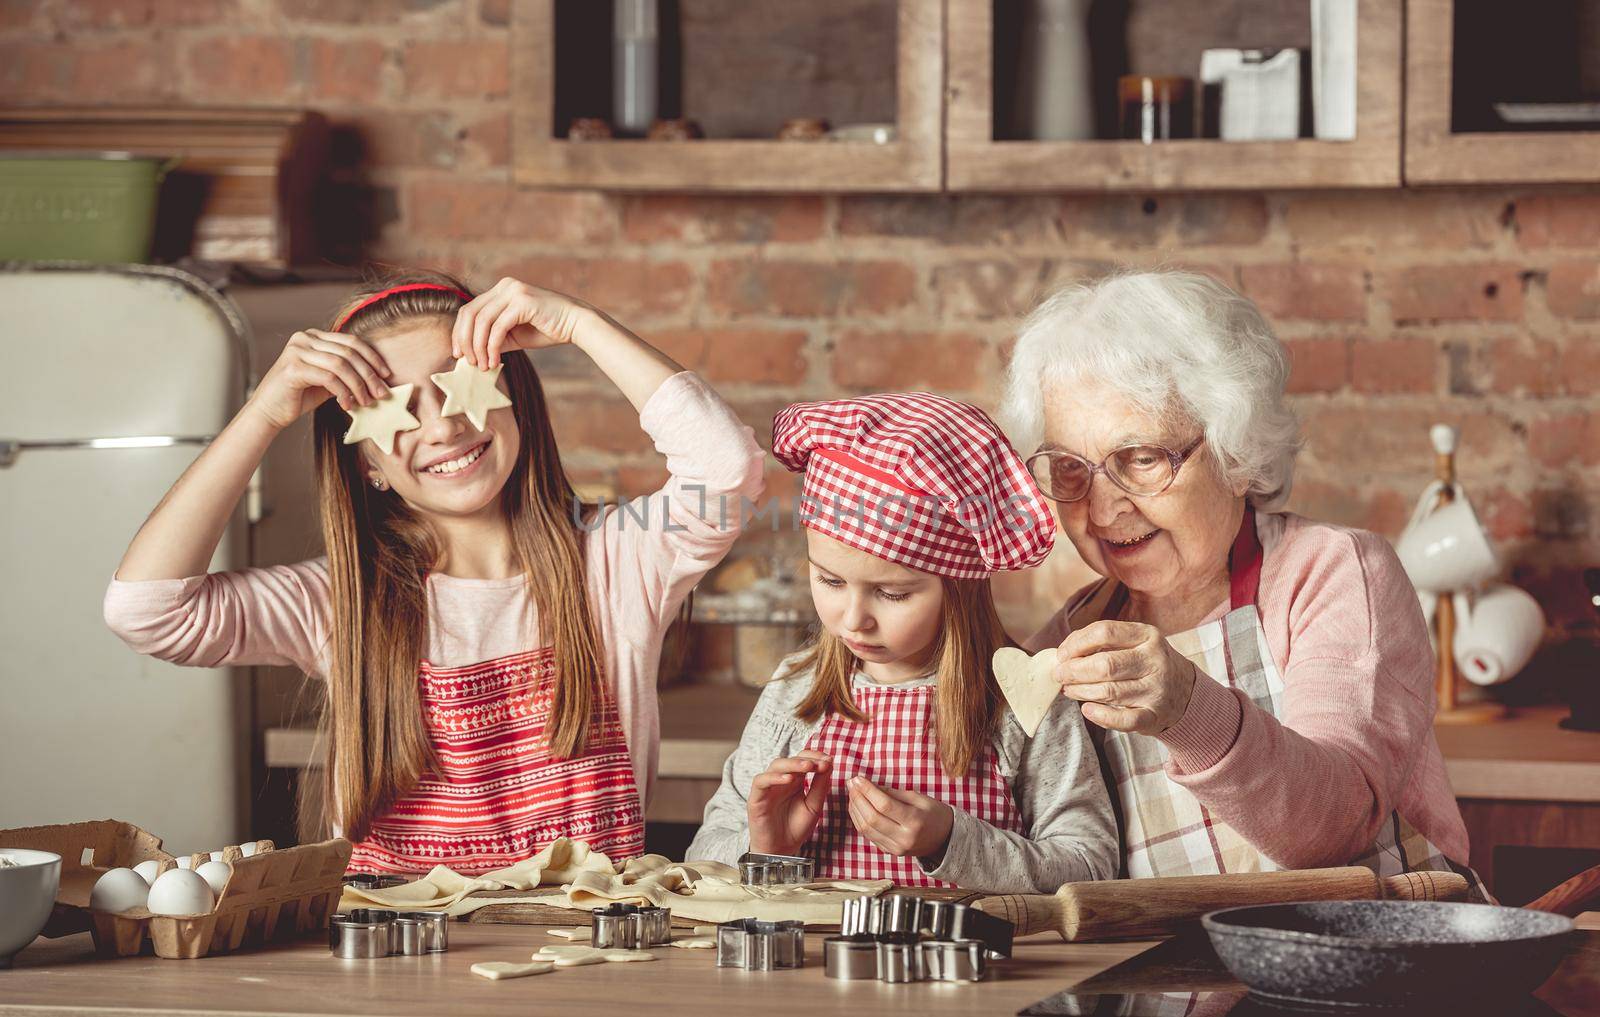 Grandma teaching granddaughters to bake homemade cookies. Little girl holding two star-shaped cookies in front of her eyes and smiling